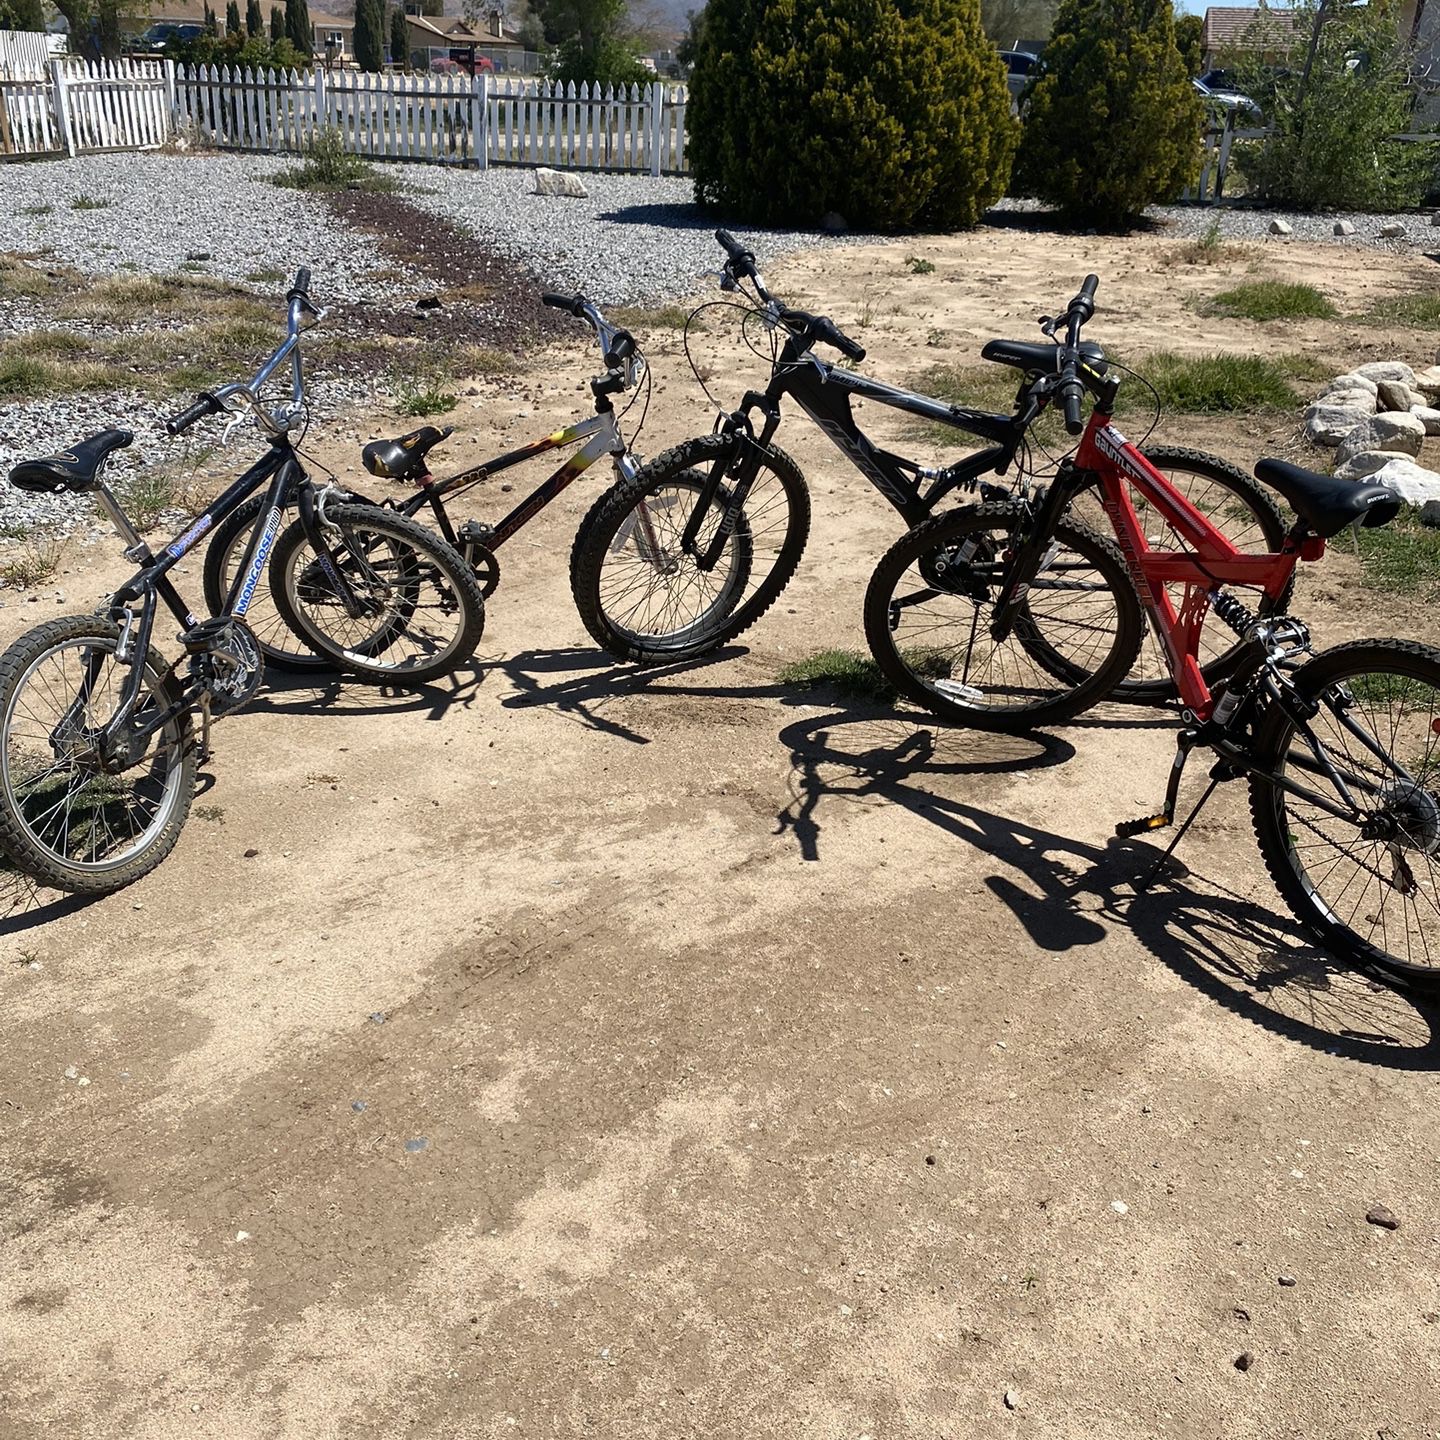  Bikes For Sale